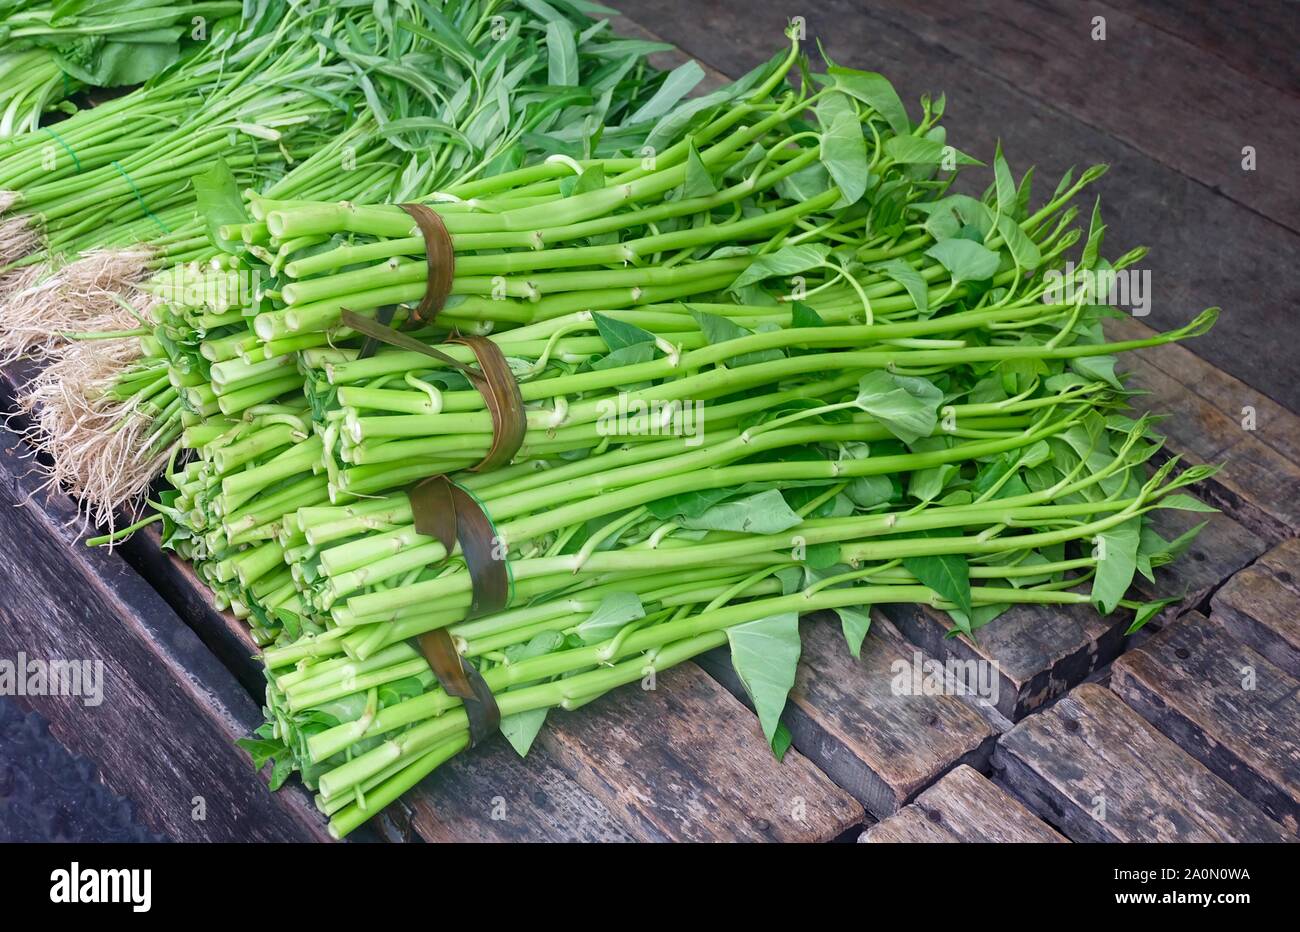 Vegetable and Herb, Pile of Water Spinach or Ipomoea Aquatica Selling at Fresh Market. Stock Photo